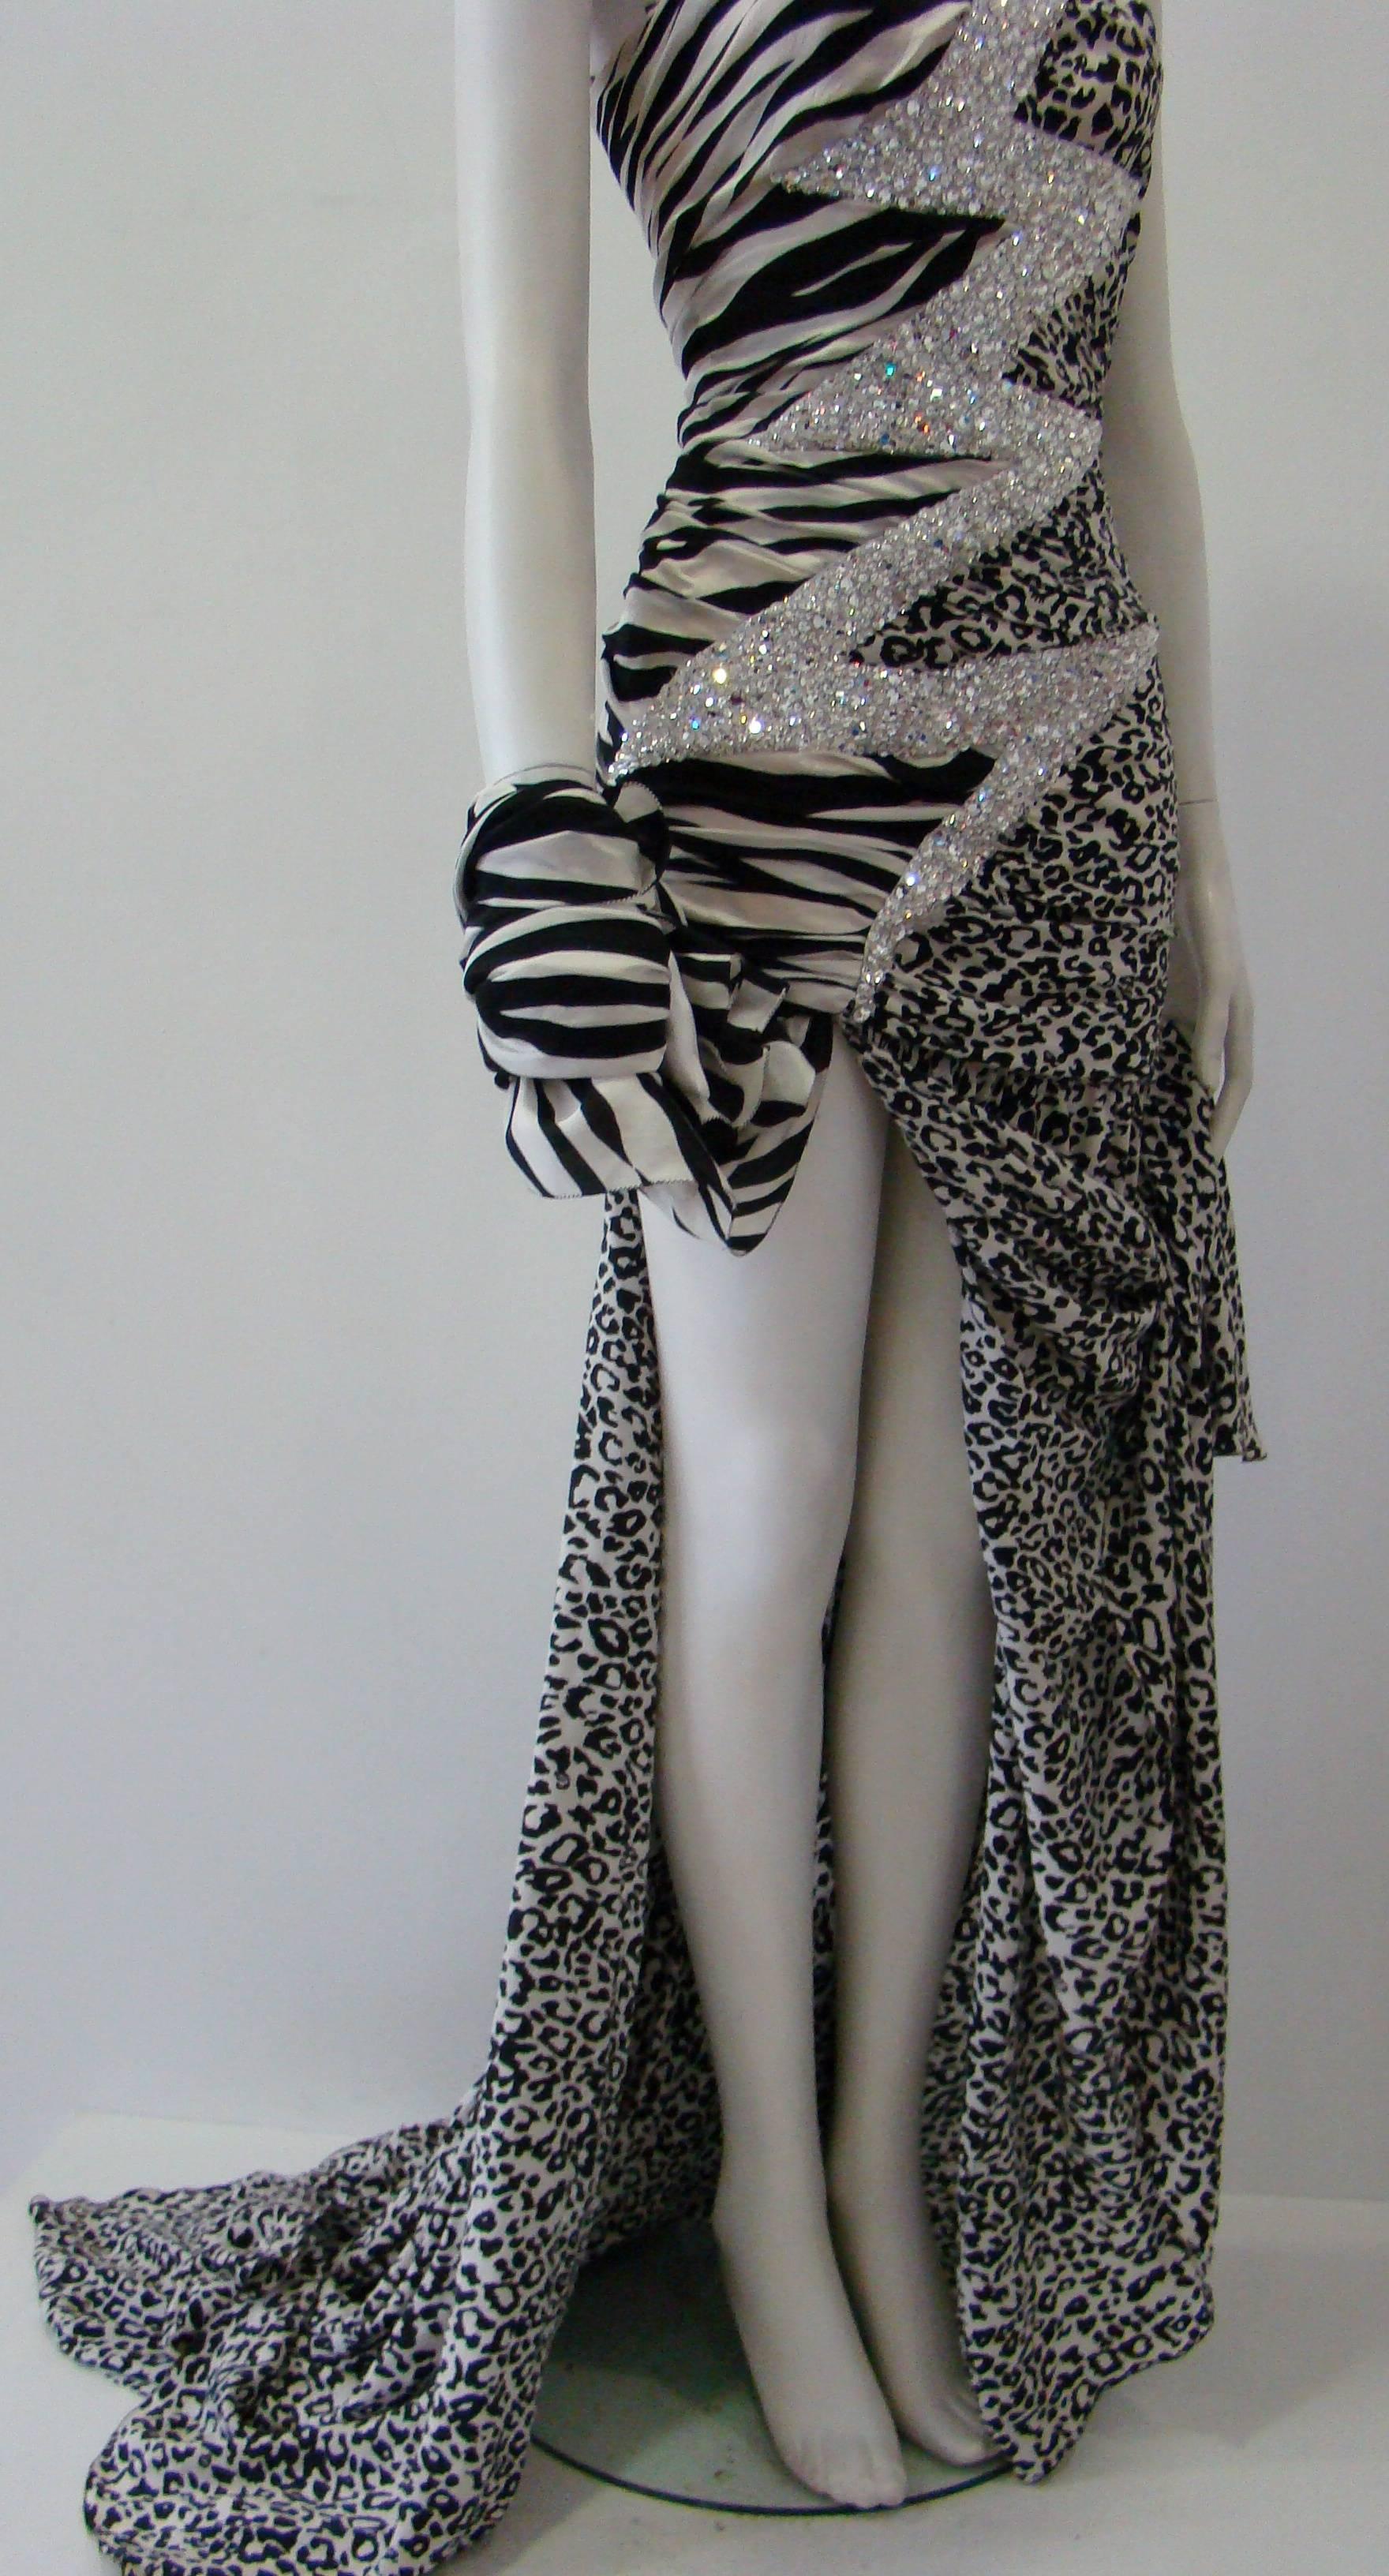 Pierre Balmain Leopard And Zebra Print Silk Evening Gown In Excellent Condition For Sale In Athens, Agia Paraskevi